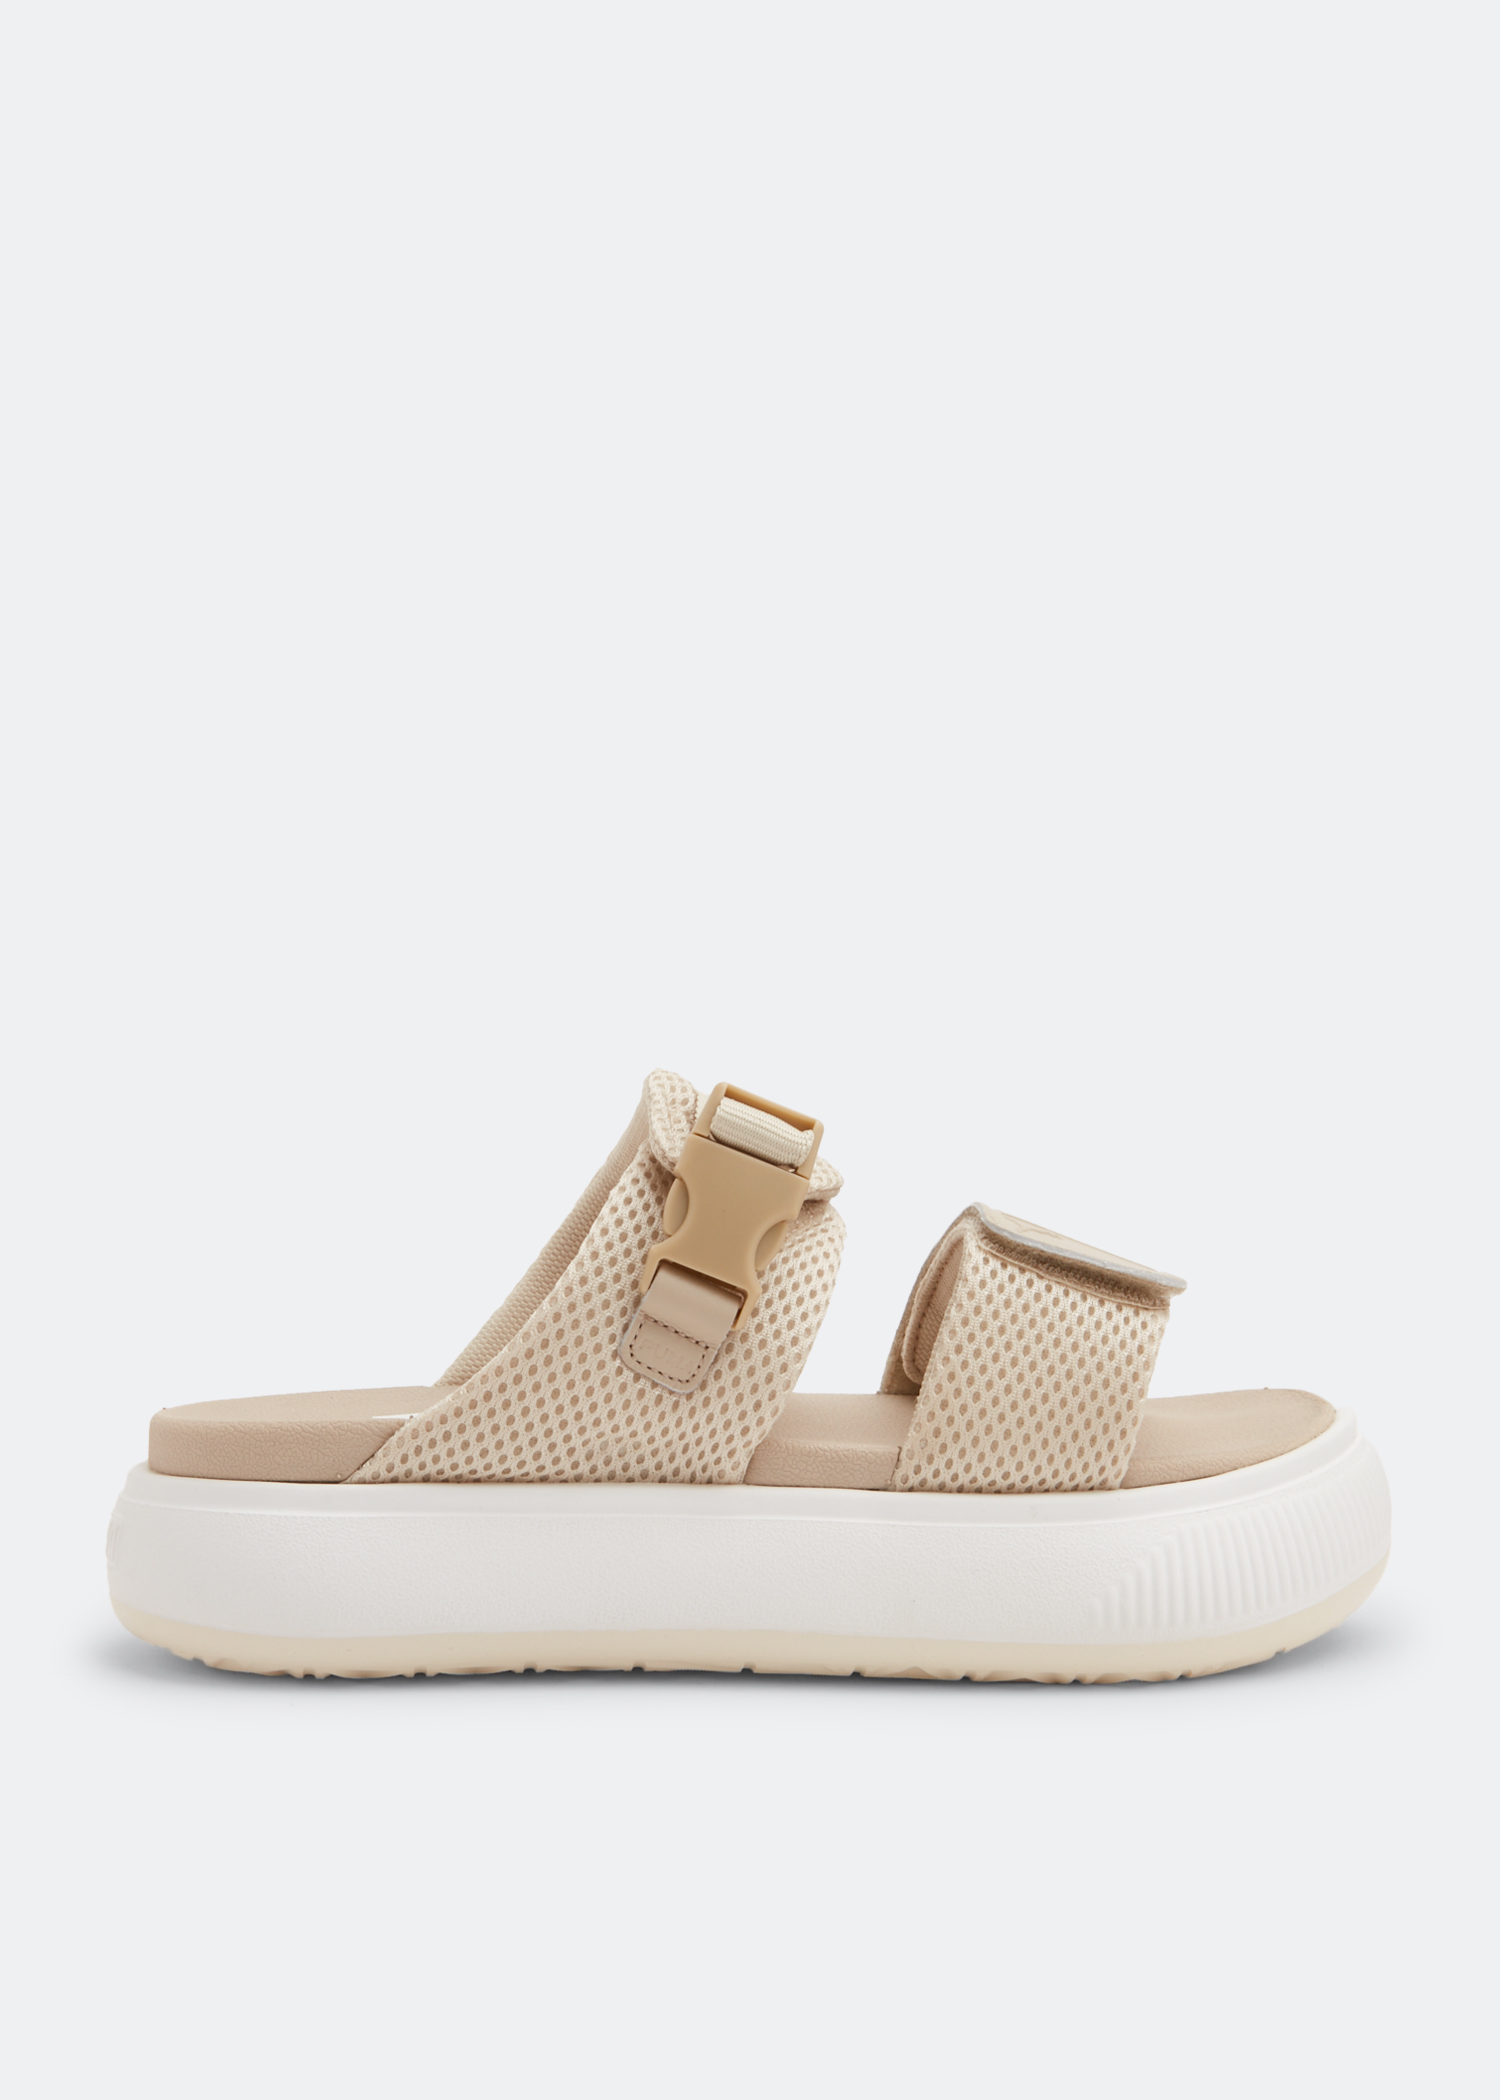 Puma Mayu Infuse sandals for Women - Beige in KSA | Level Shoes